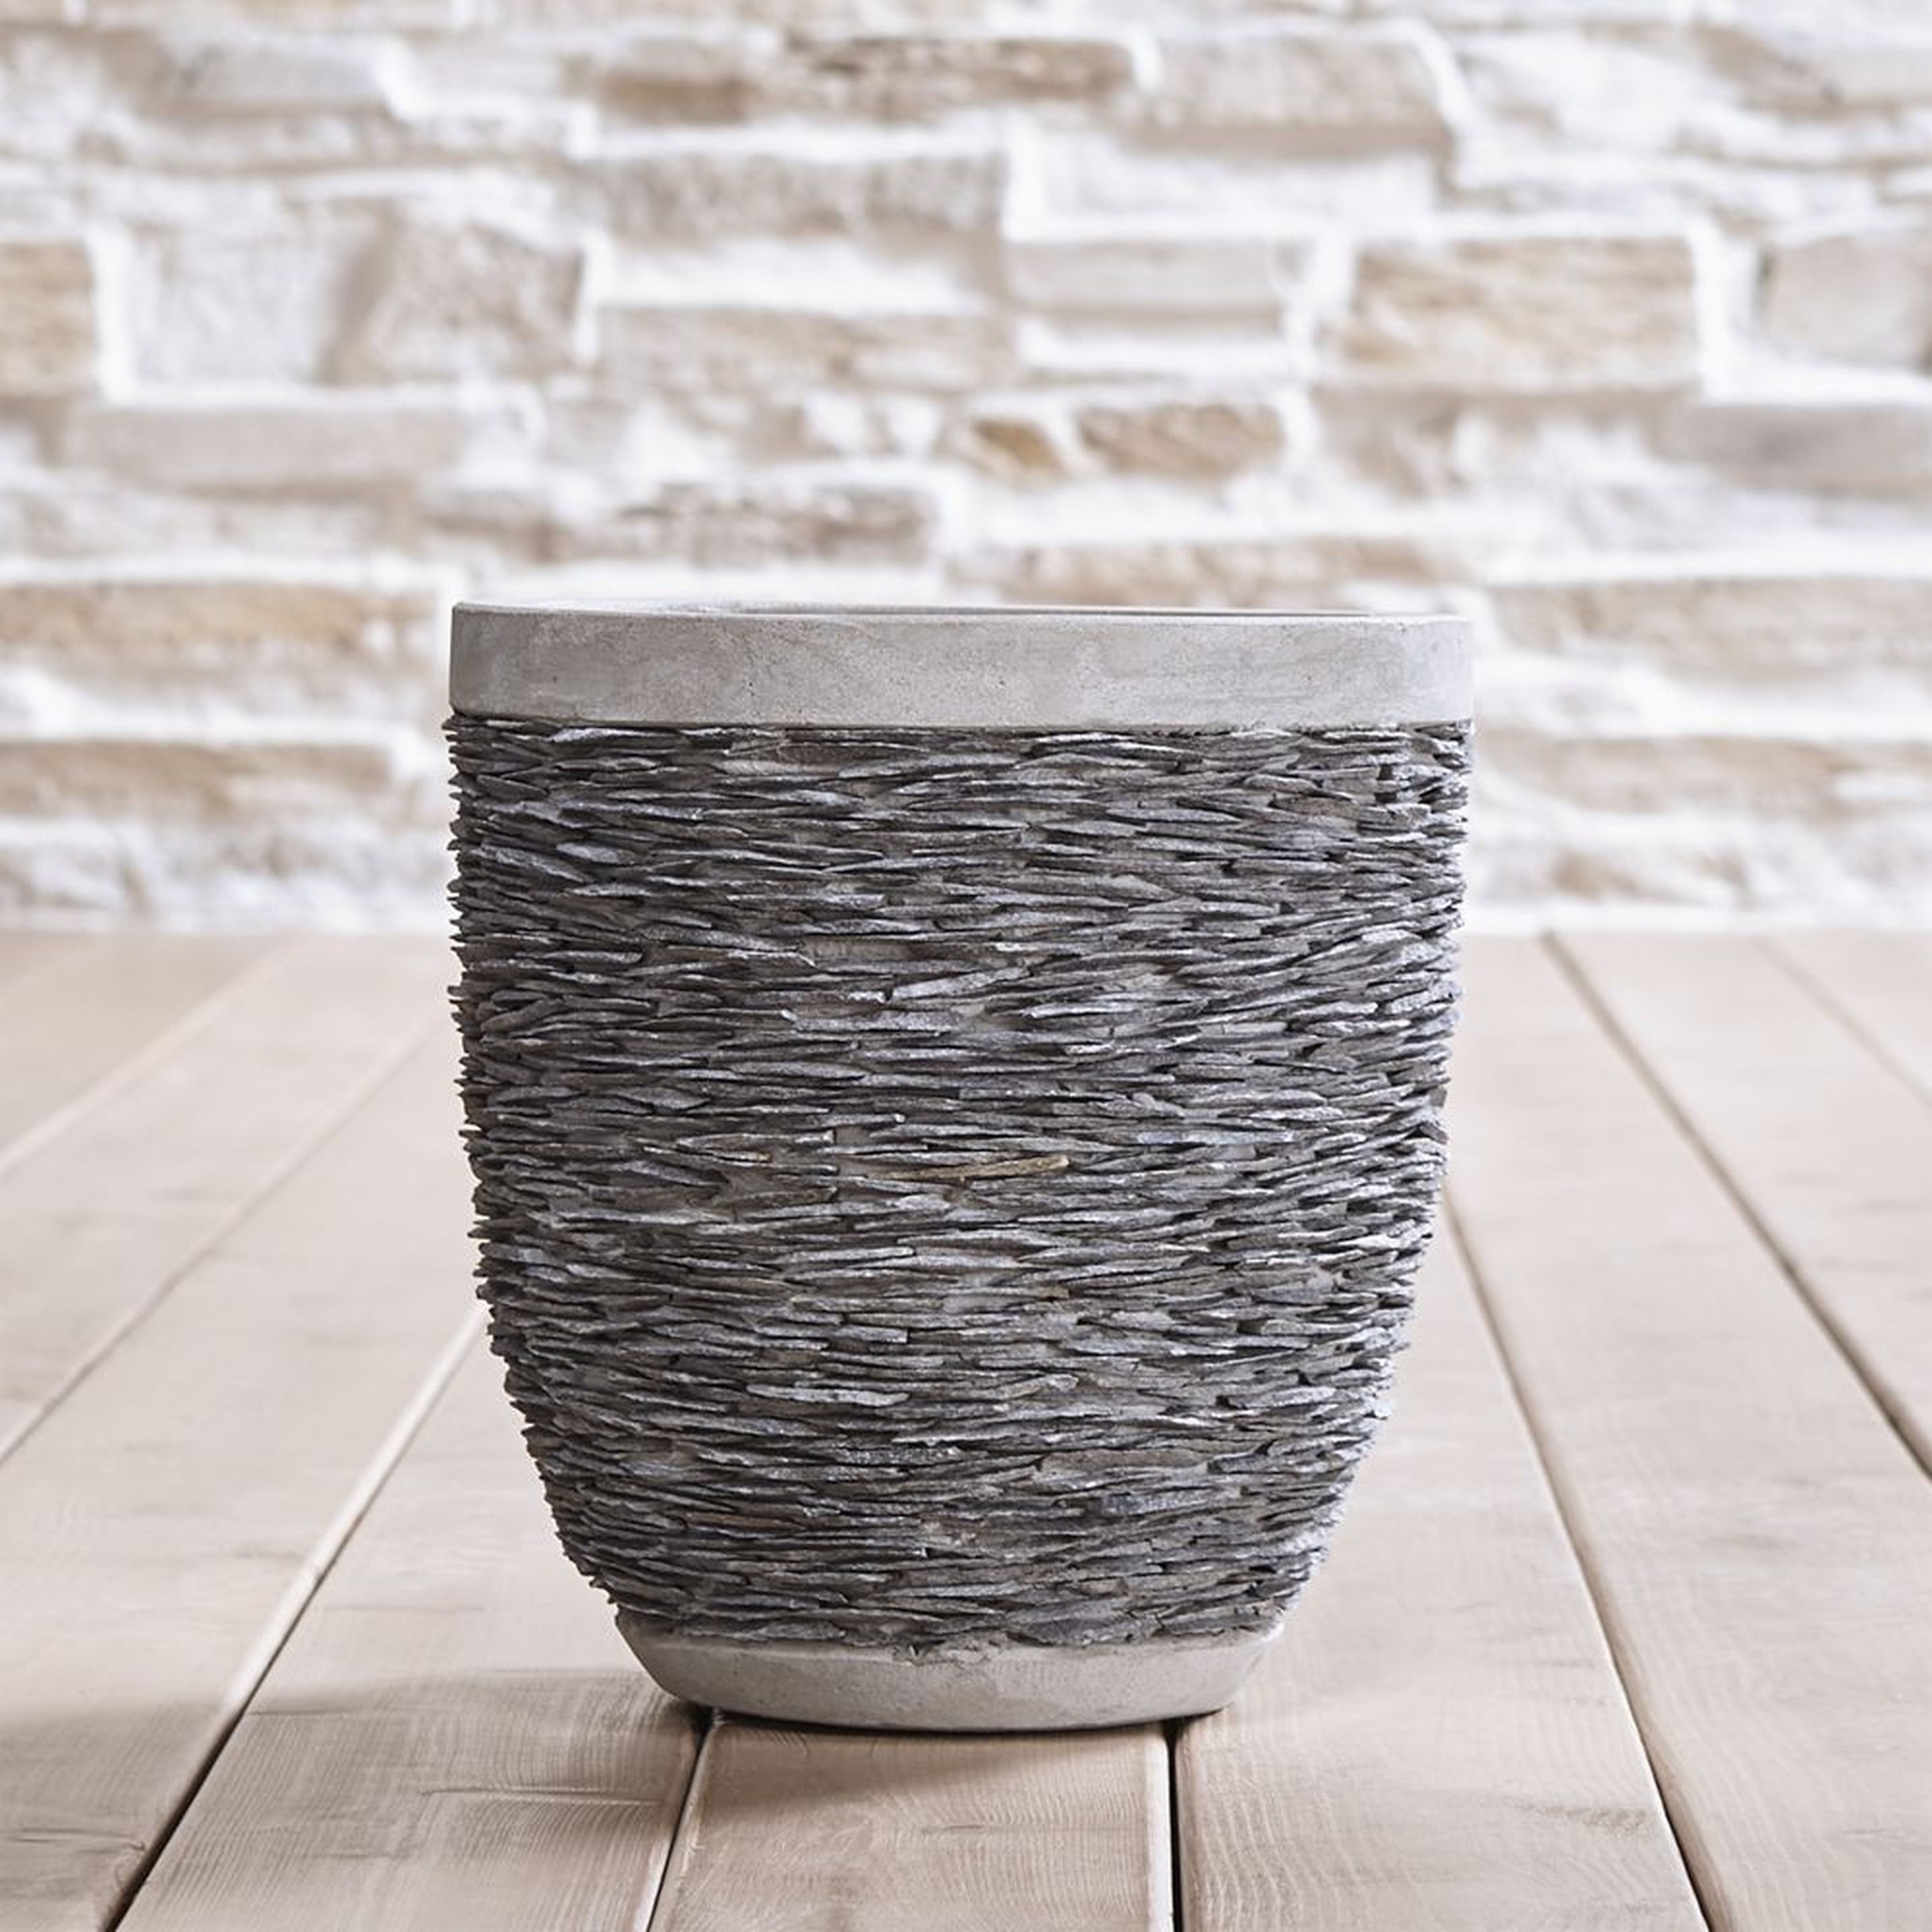 Stacked Small Rock Indoor/Outdoor Planter - Crate and Barrel